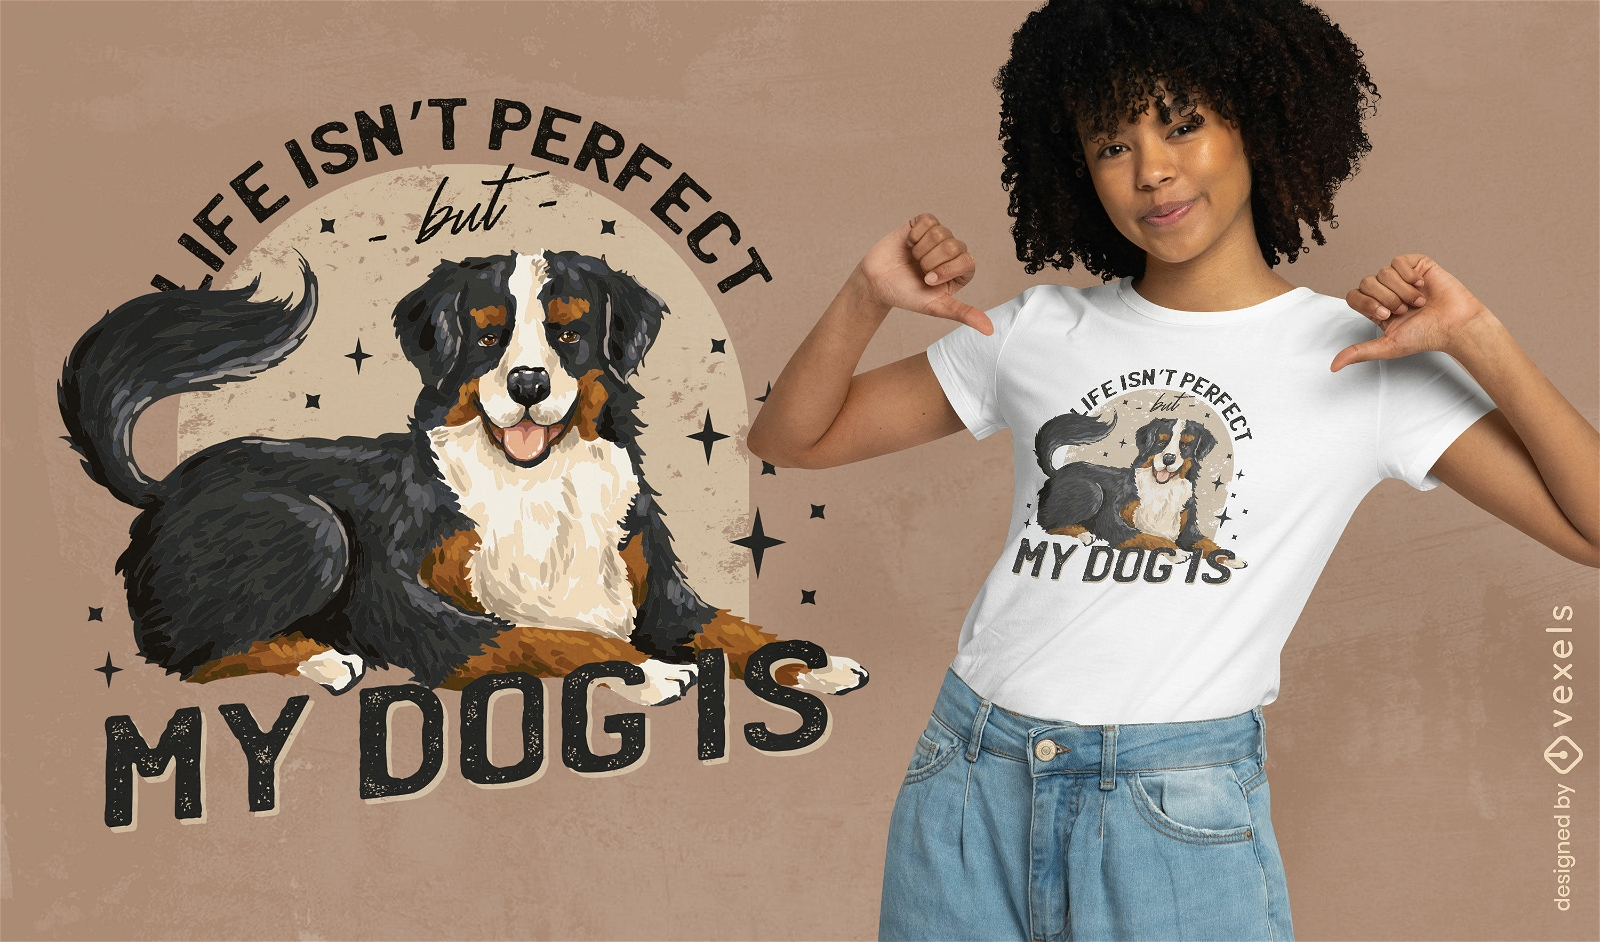 Perfect dog owner quote t-shirt design